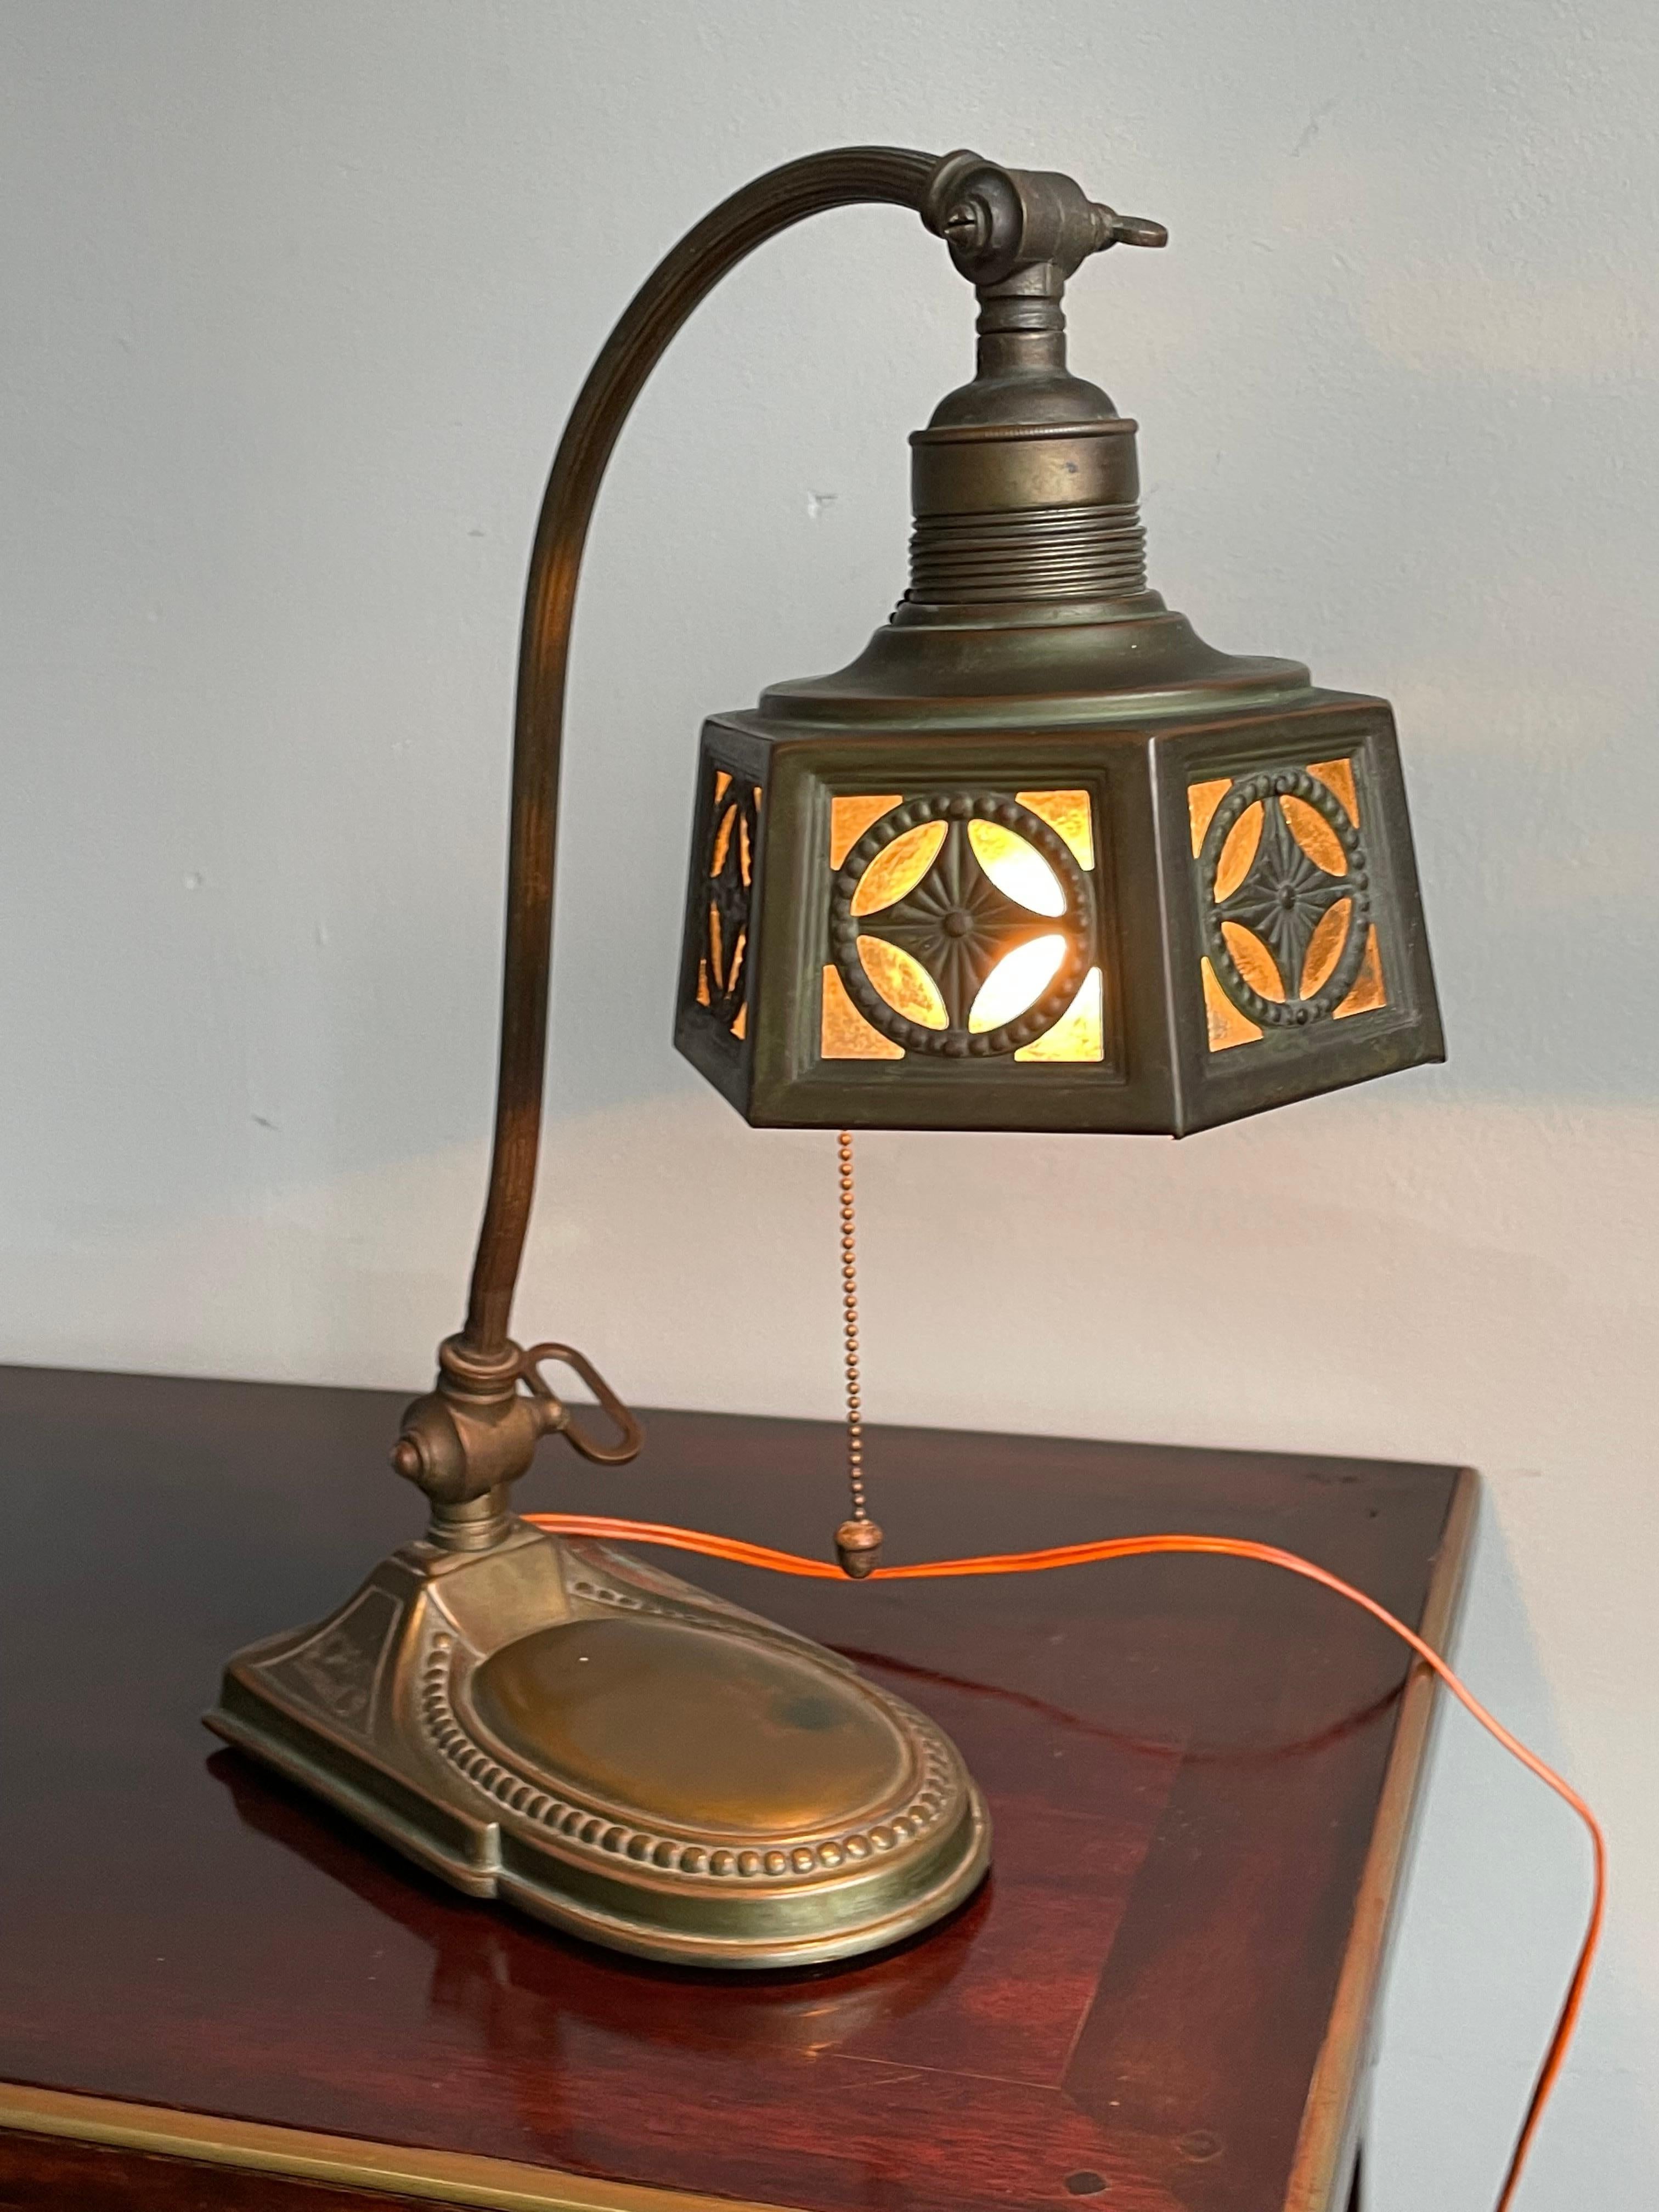 Rare European Arts and Crafts, Adjustable Brass and Glass Table / Desk Lamp 1910 For Sale 1